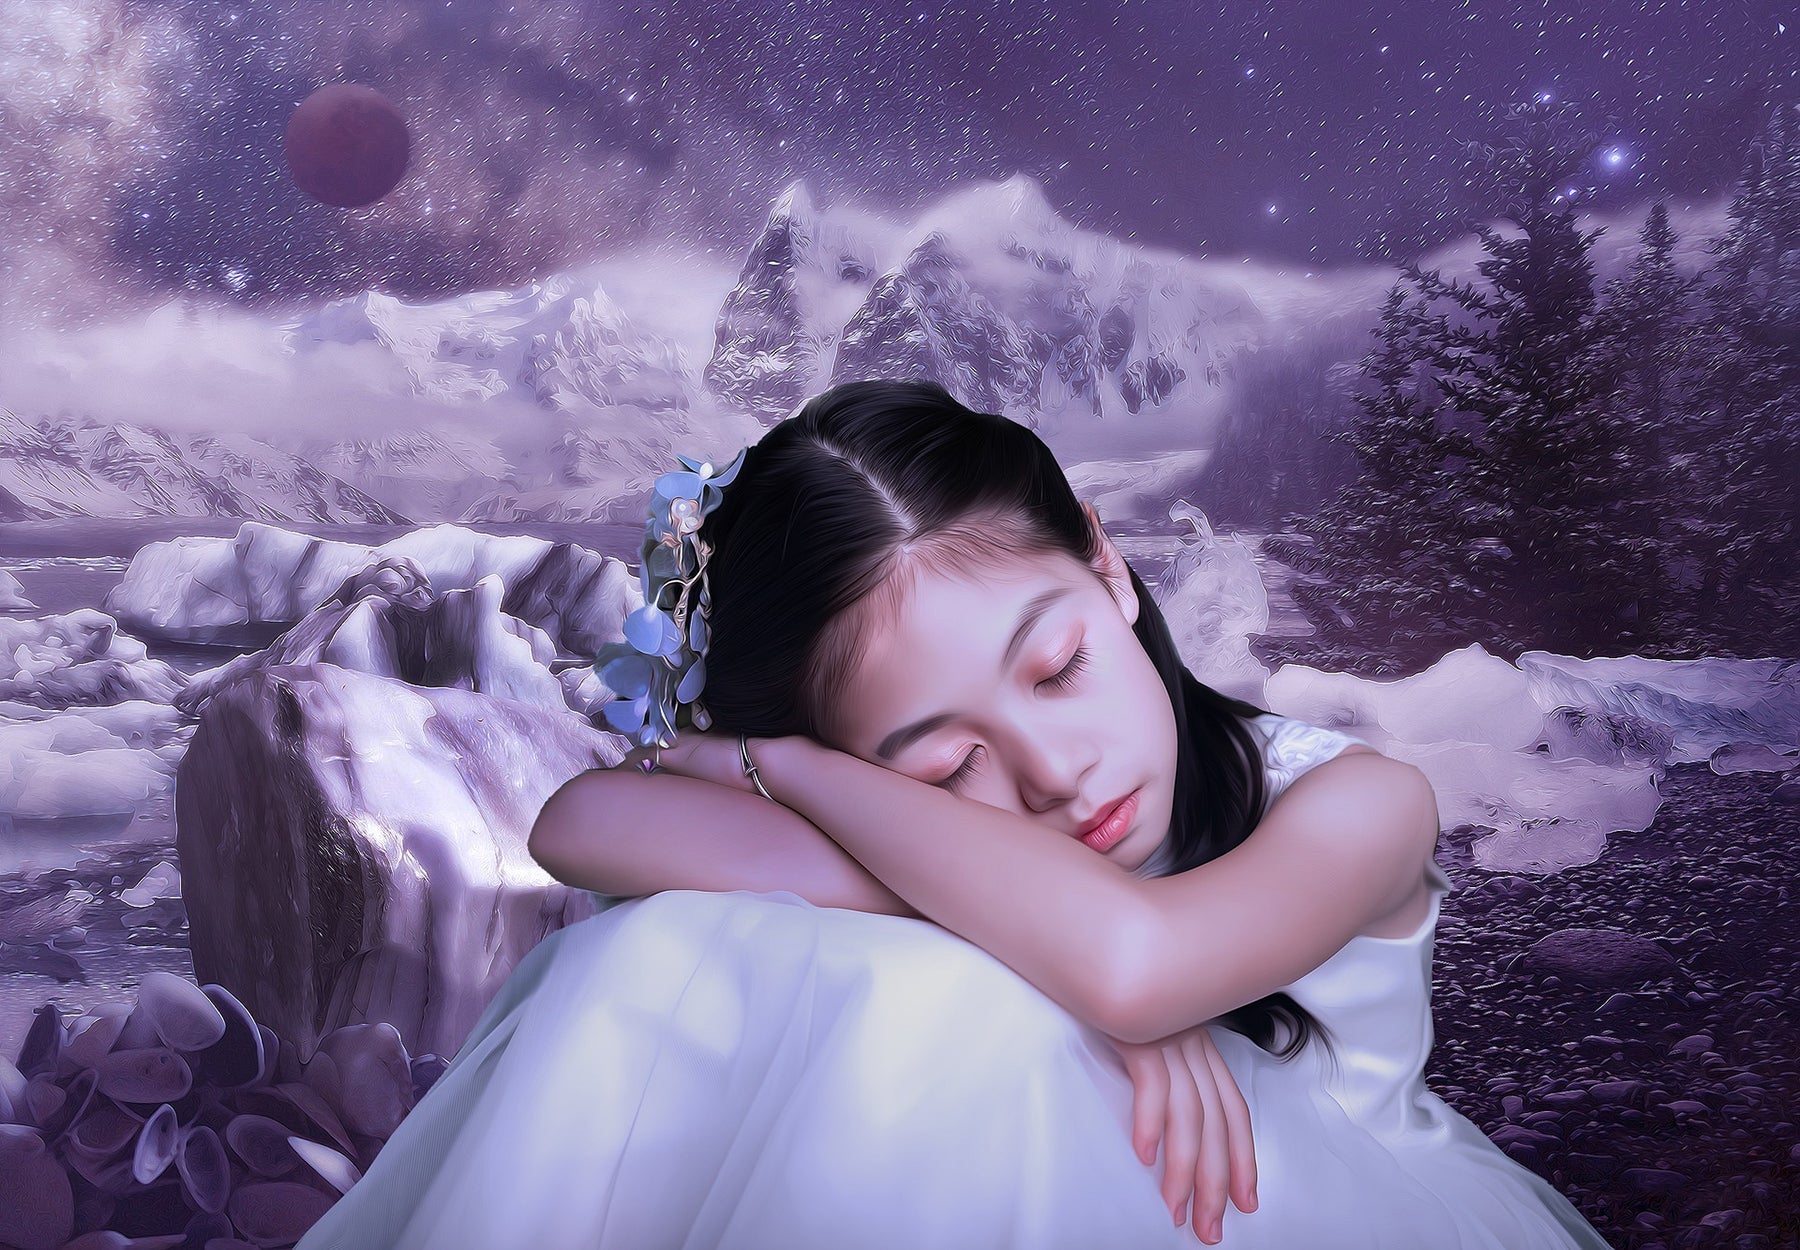 Ten Interesting Facts About Sleep And Dreams - DSF Antique Jewelry